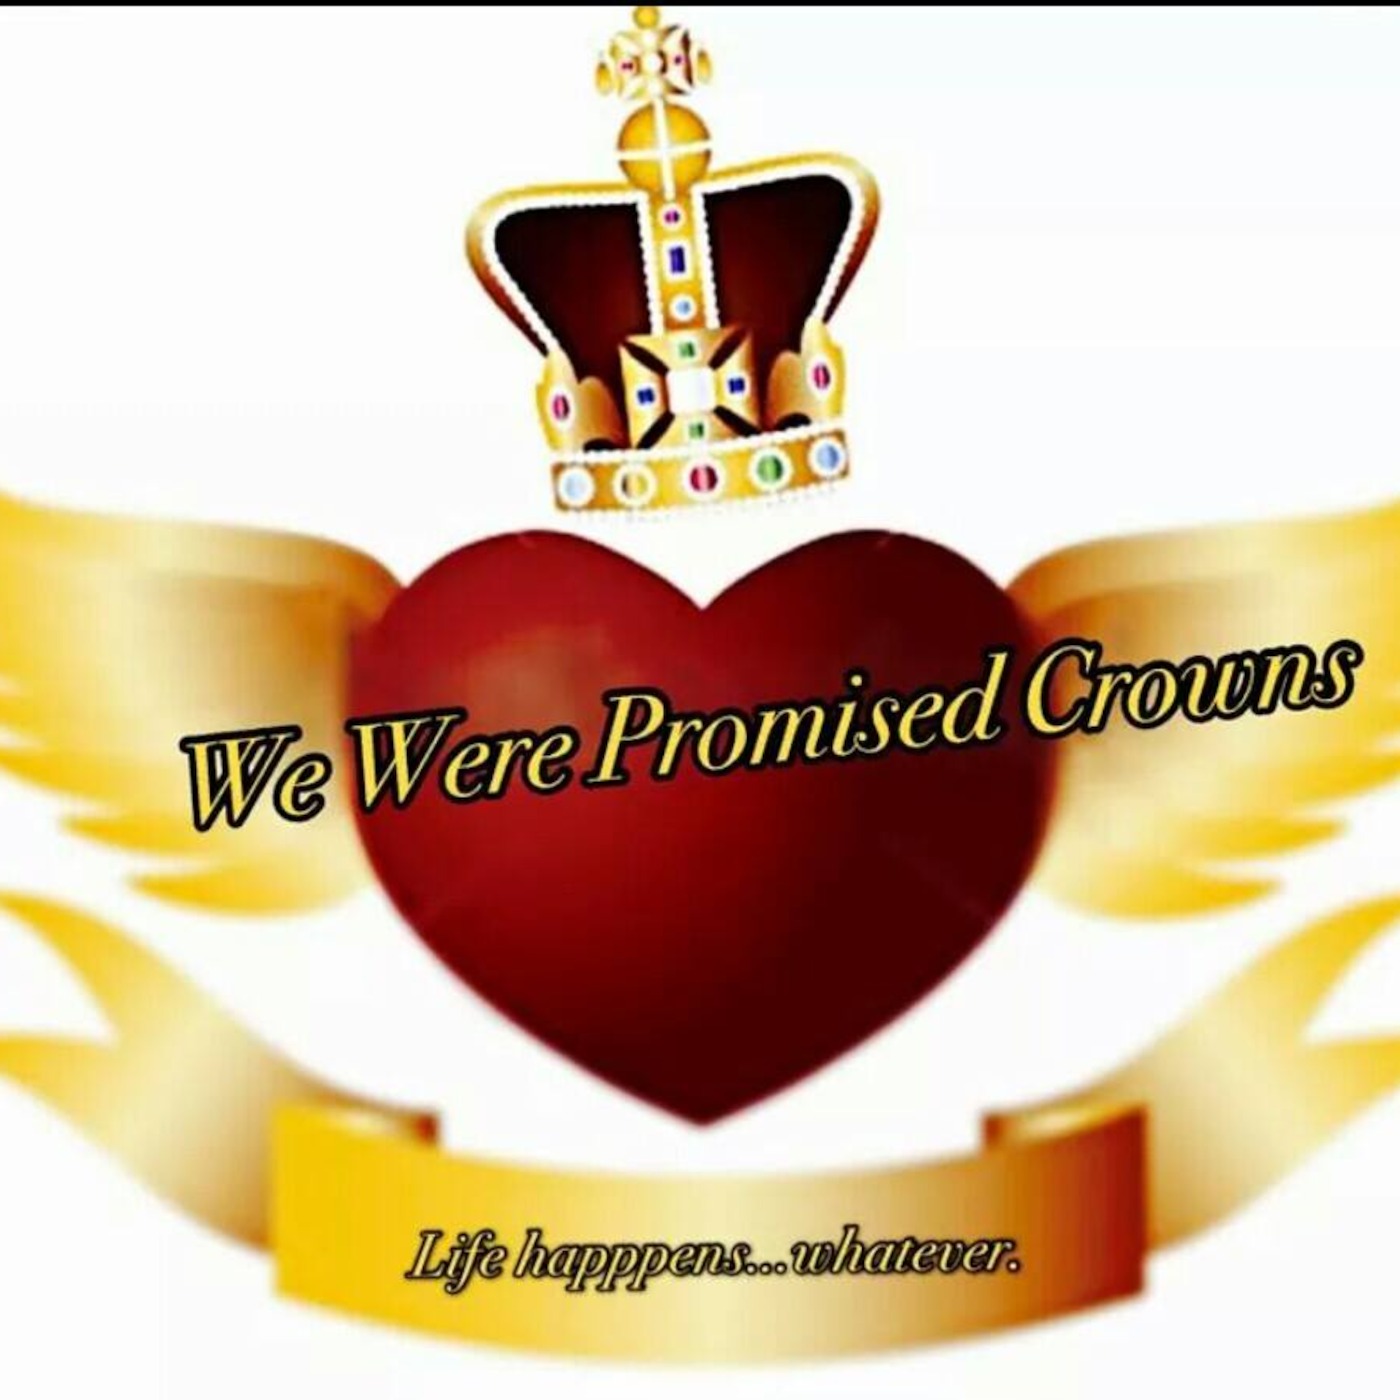 We Were Promised Crowns' Podcast